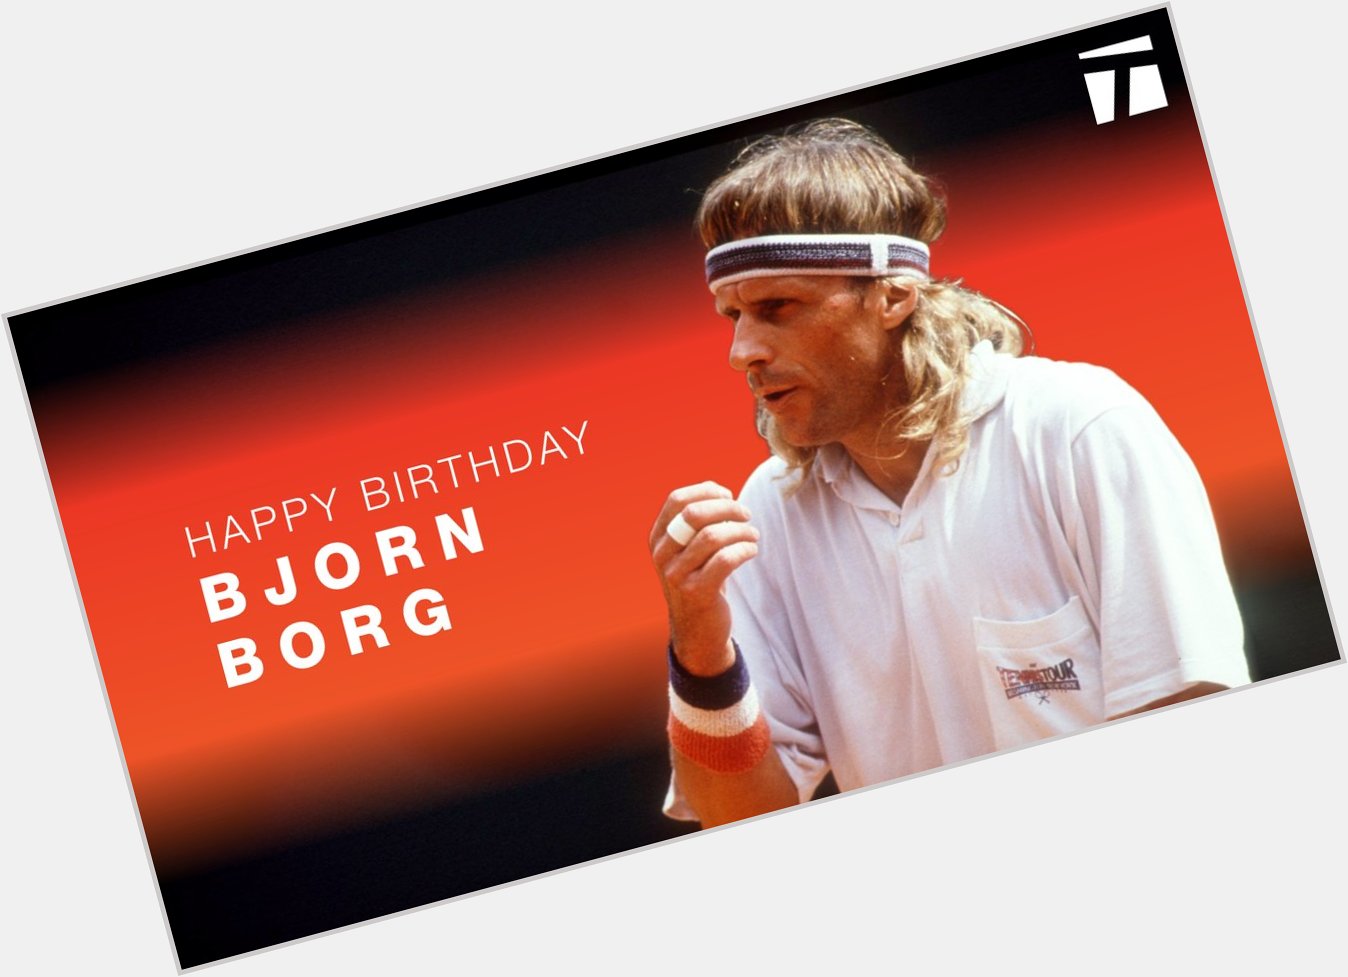 Happy Birthday to the man who got to 11 Grand Slam titles first, former World No. 1, Bjorn Borg. 